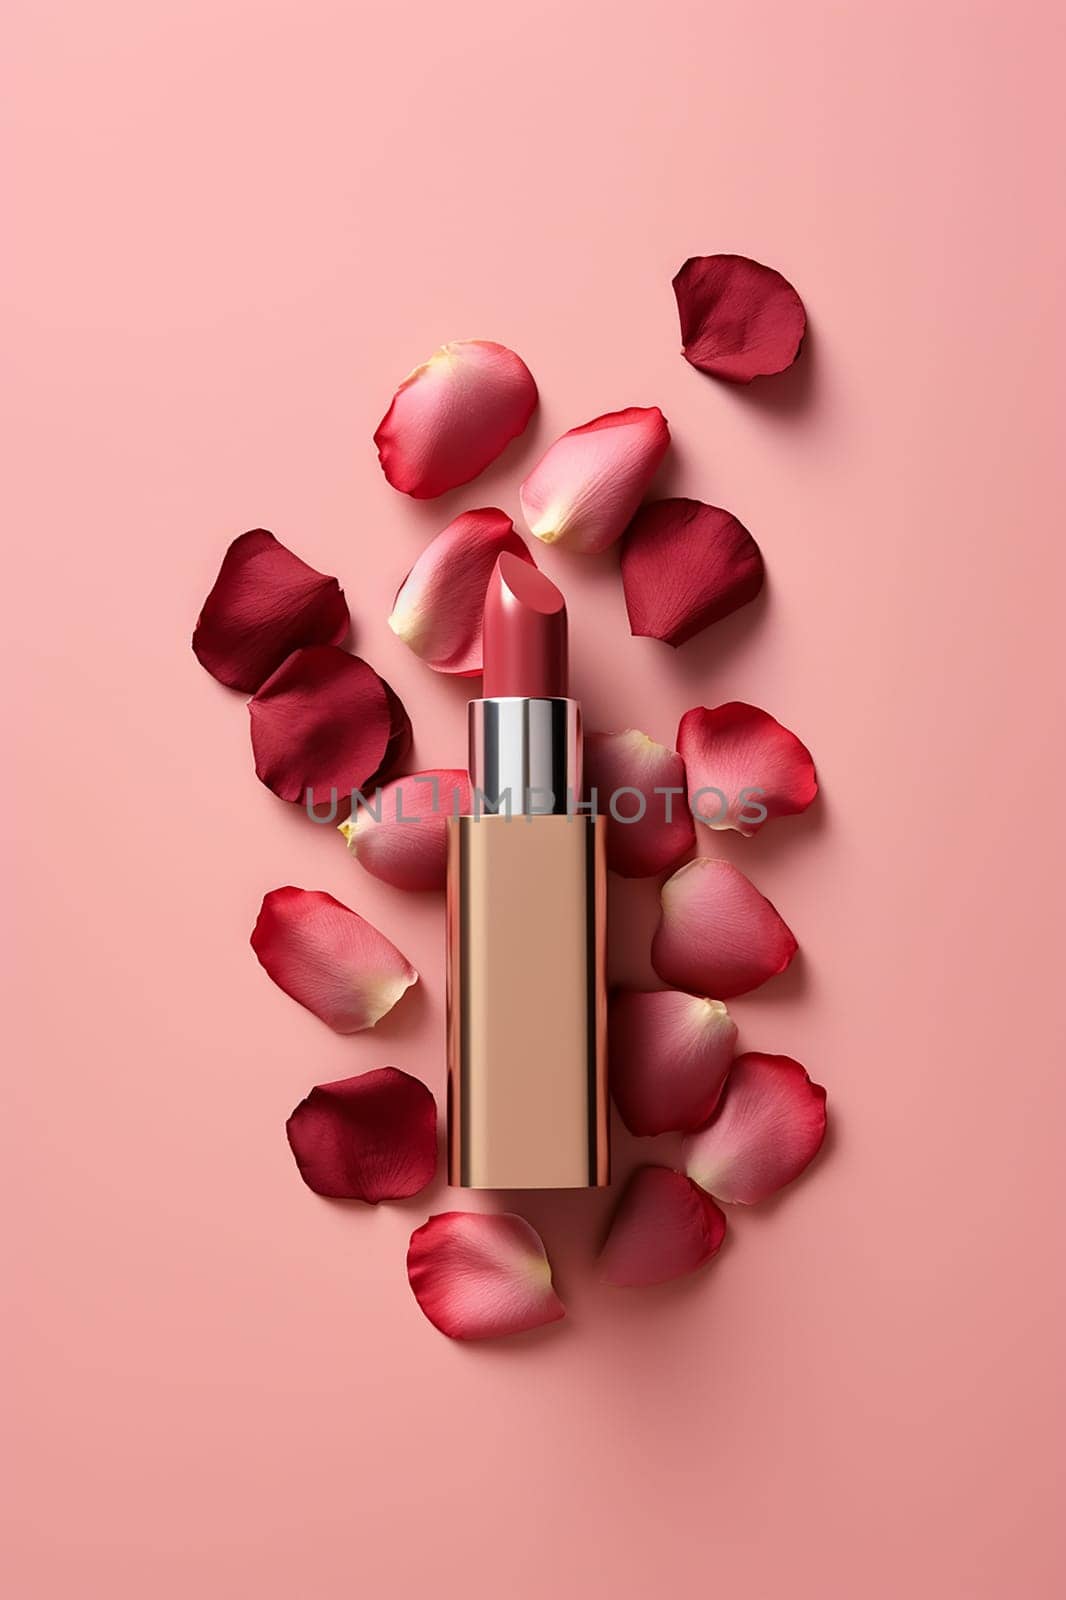 Golden lipstick surrounded by scattered rose petals on a pink background.